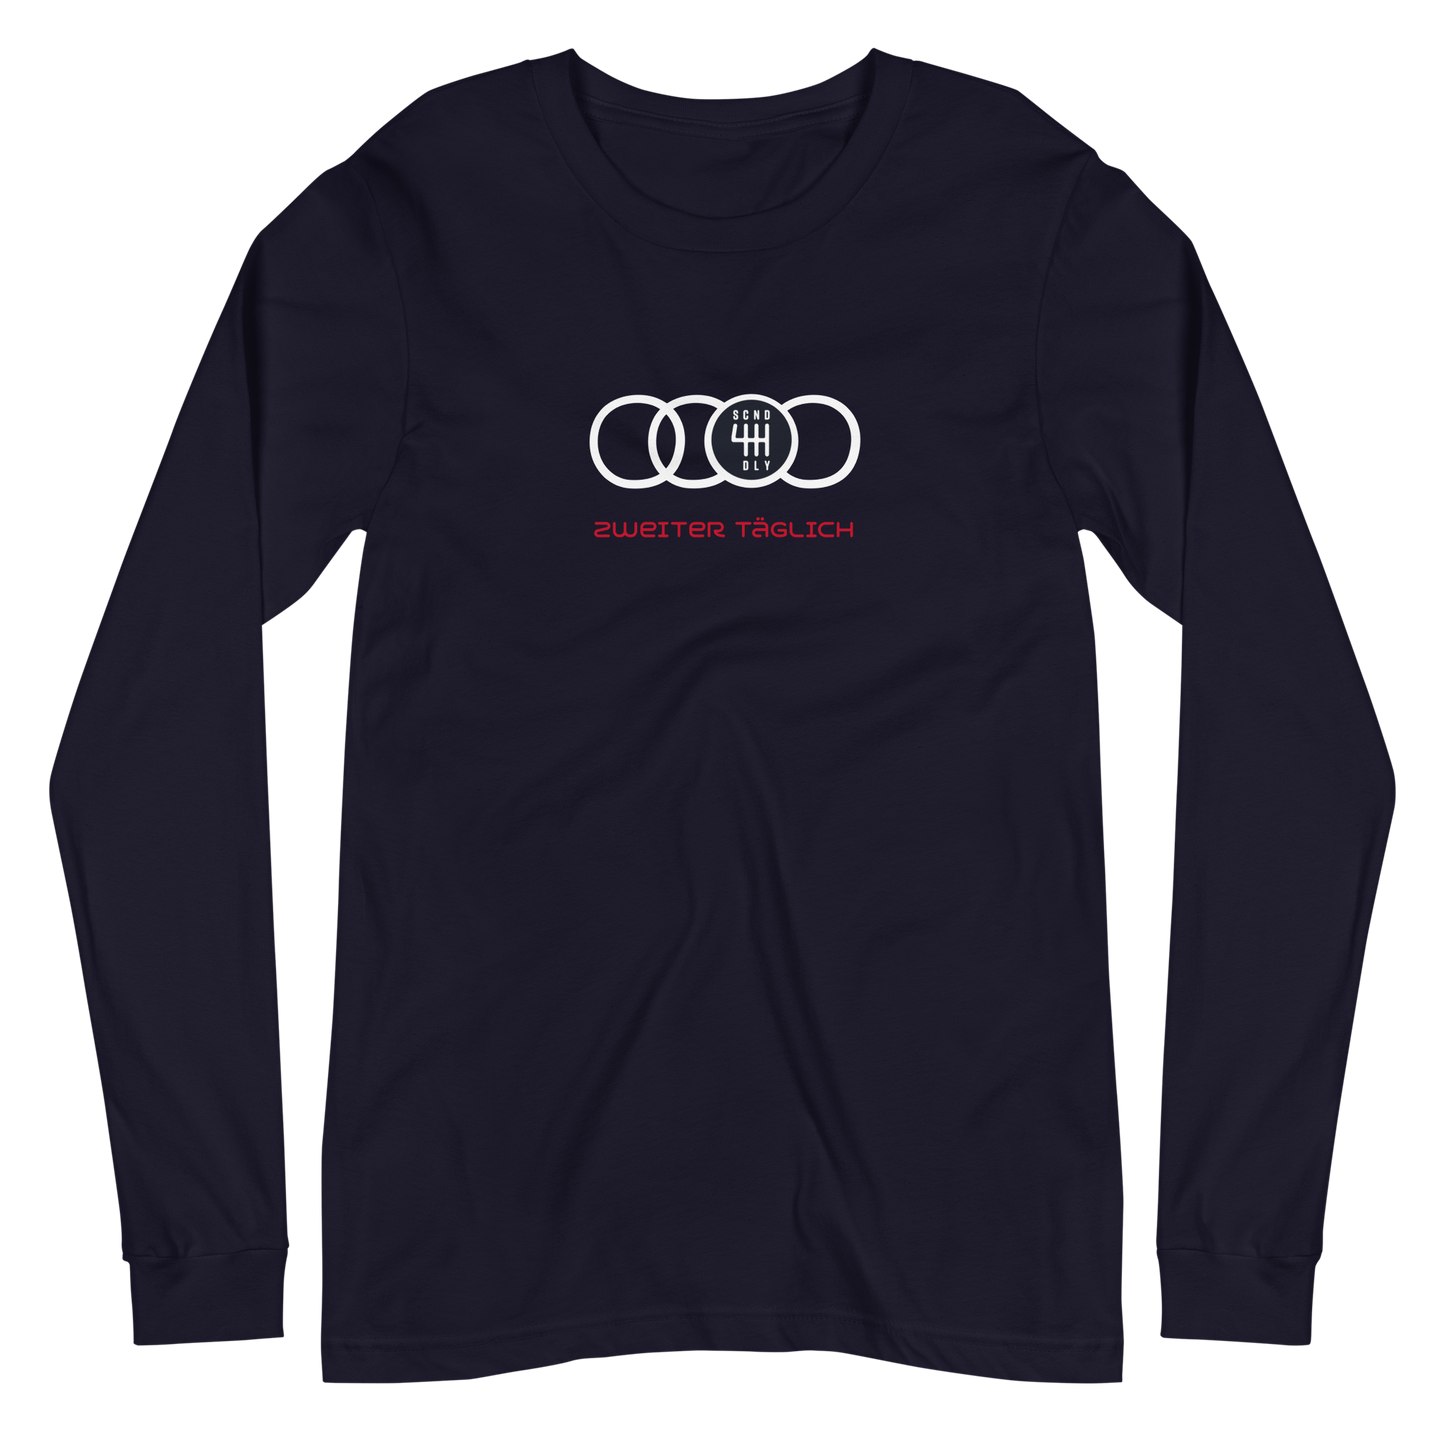 4-rings zweite täglich "Second Daily" Long Sleeve Tee